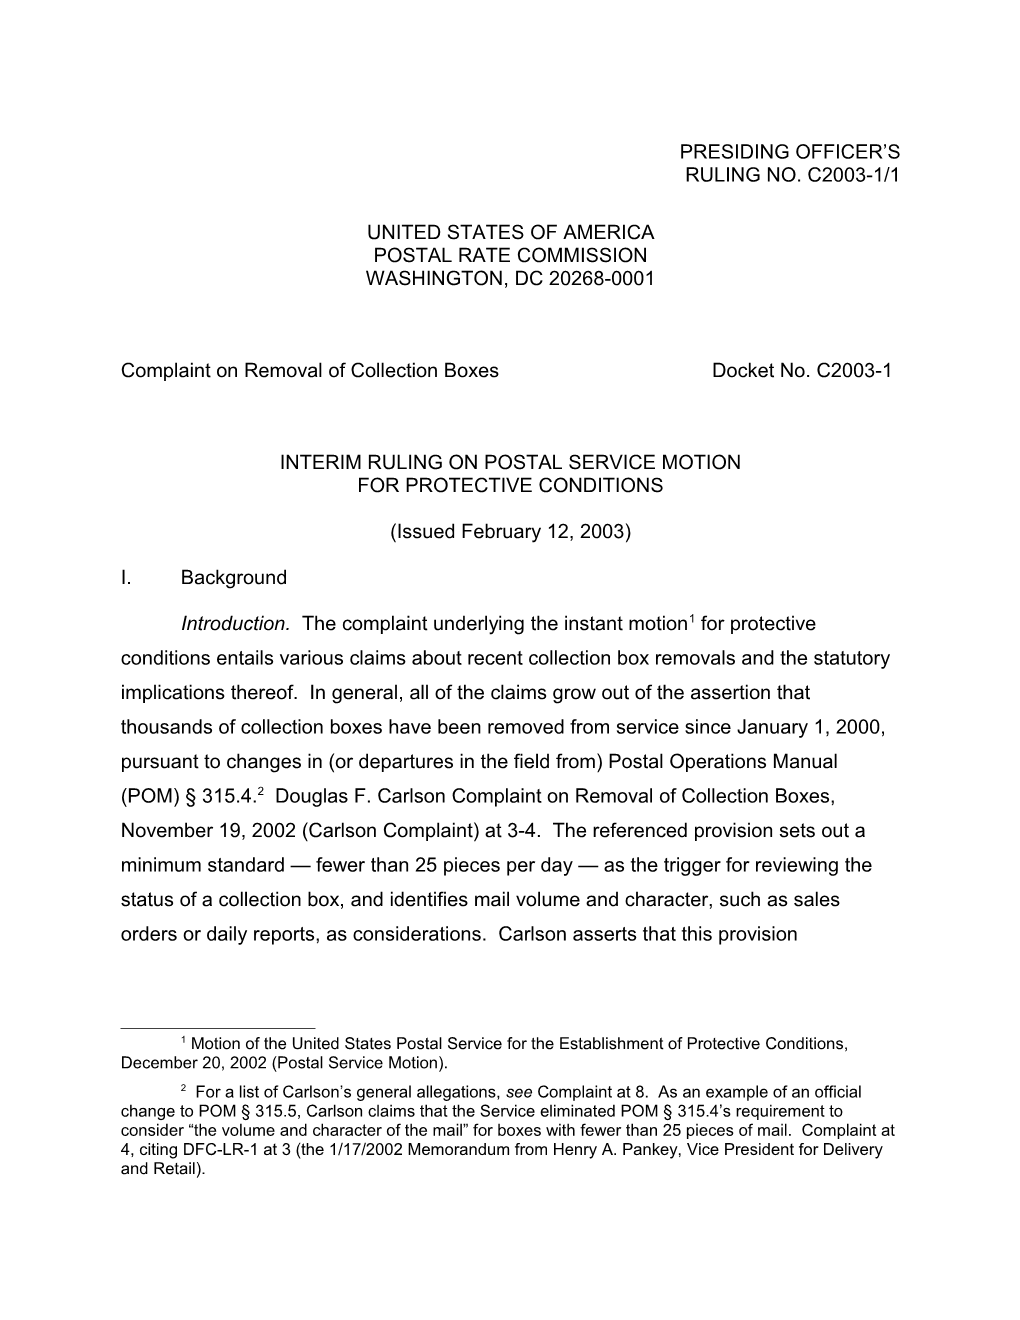 Complaint on Removal of Collection Boxesdocket No. C2003-1